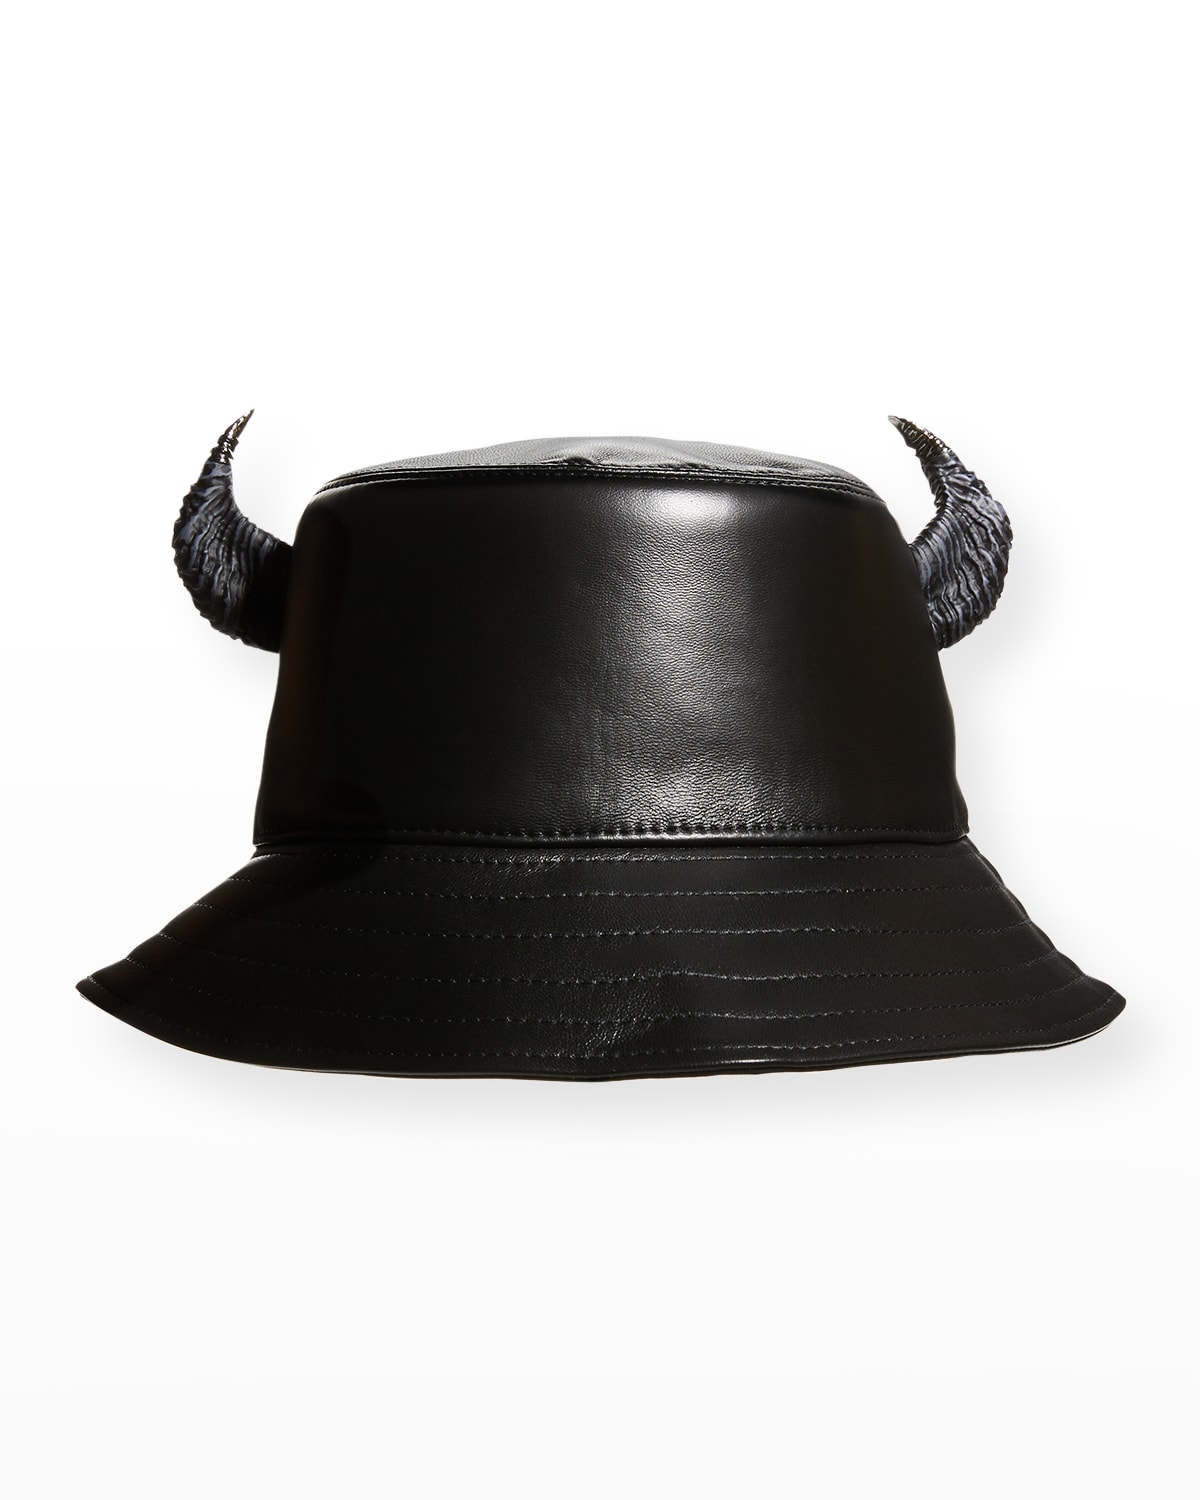 Givenchy Men's Leather Bucket Hat W/ Horns In Black